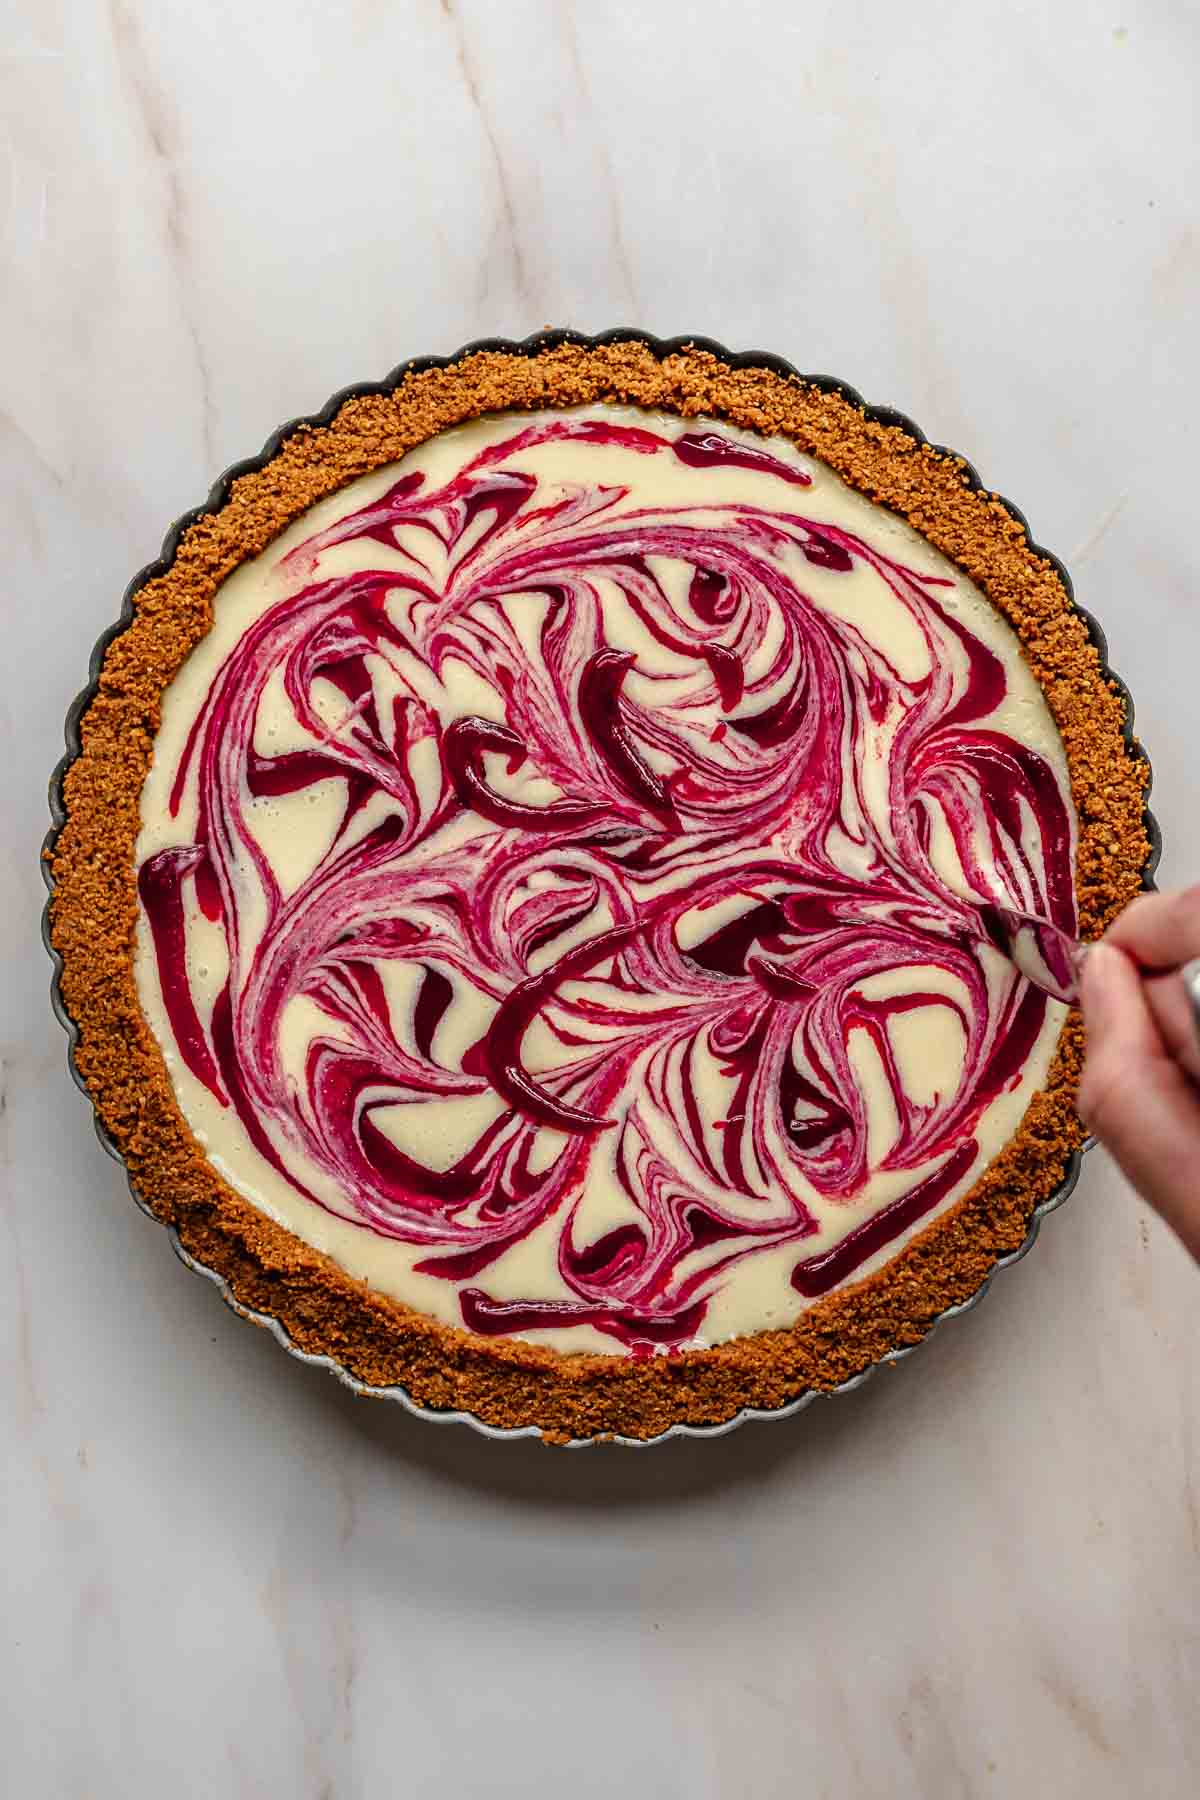 A knife swirls the cranberry puree through the white chocolate.